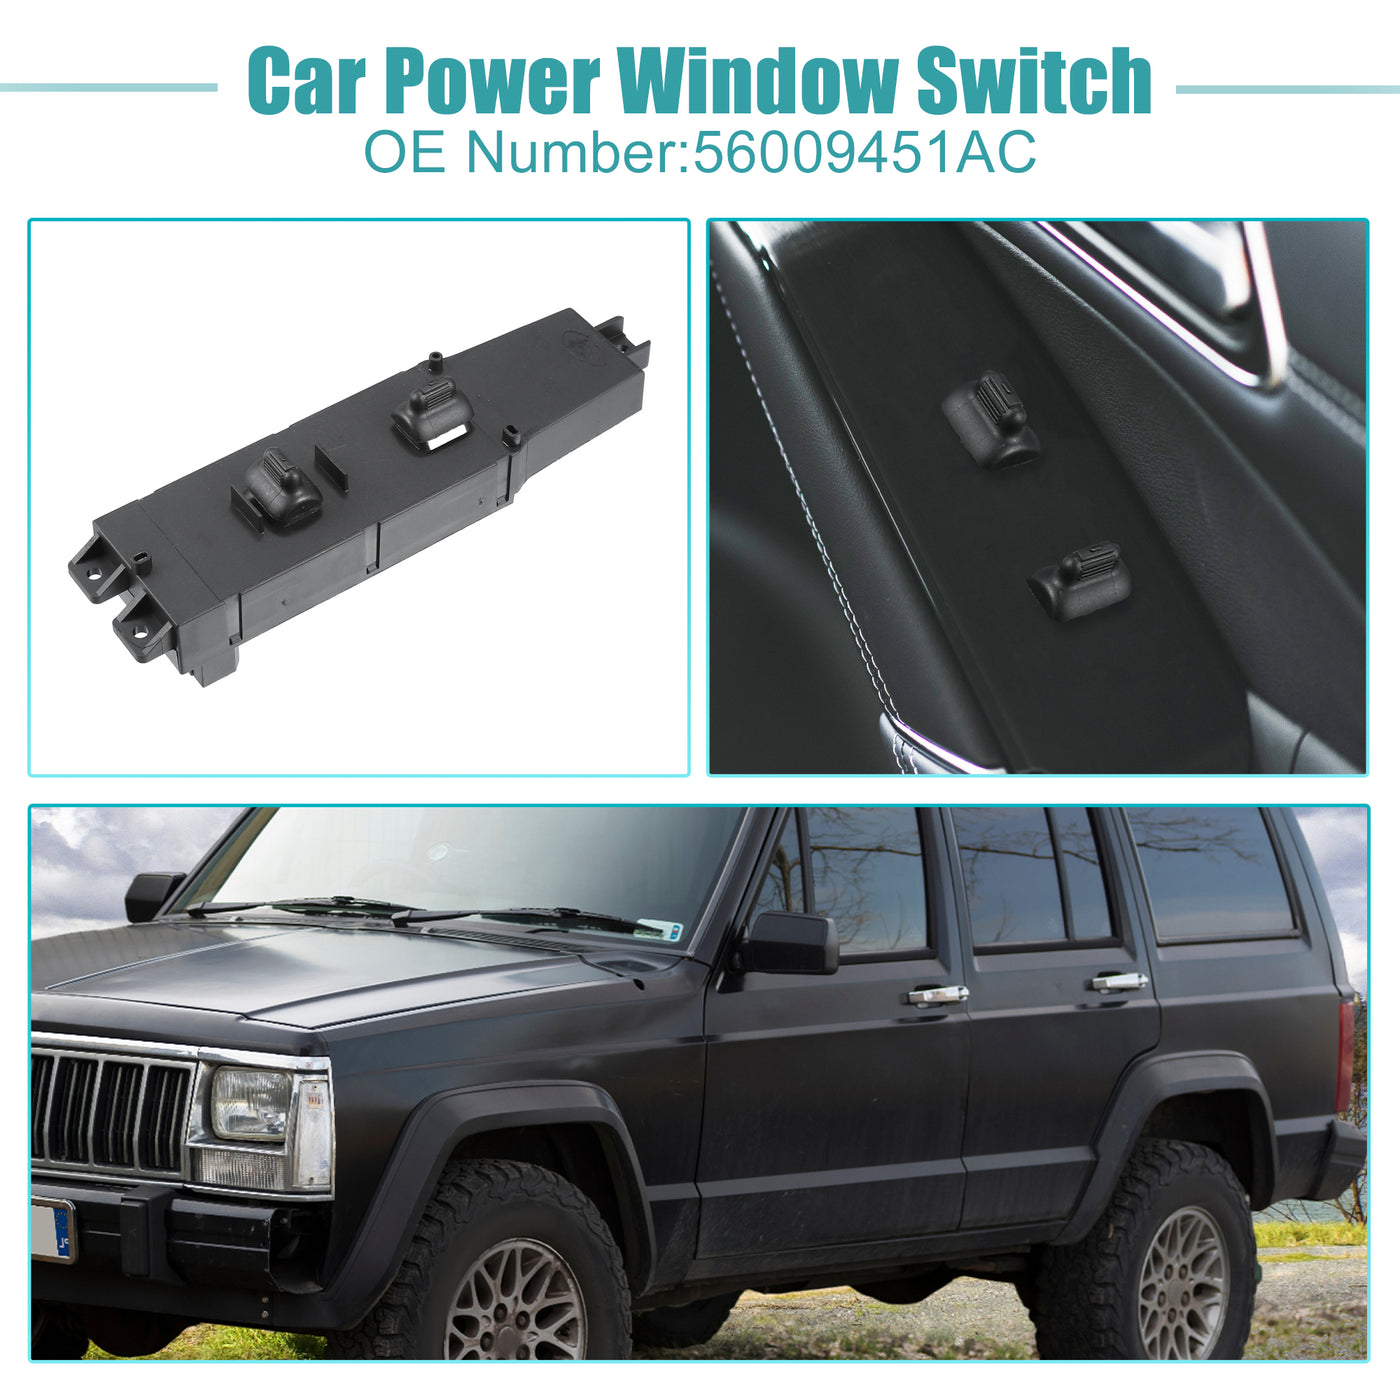 ACROPIX Power Window Switch Window Control Switch Fit for Jeep Cherokee 1999-2001 No.56009451AC - Pack of 1